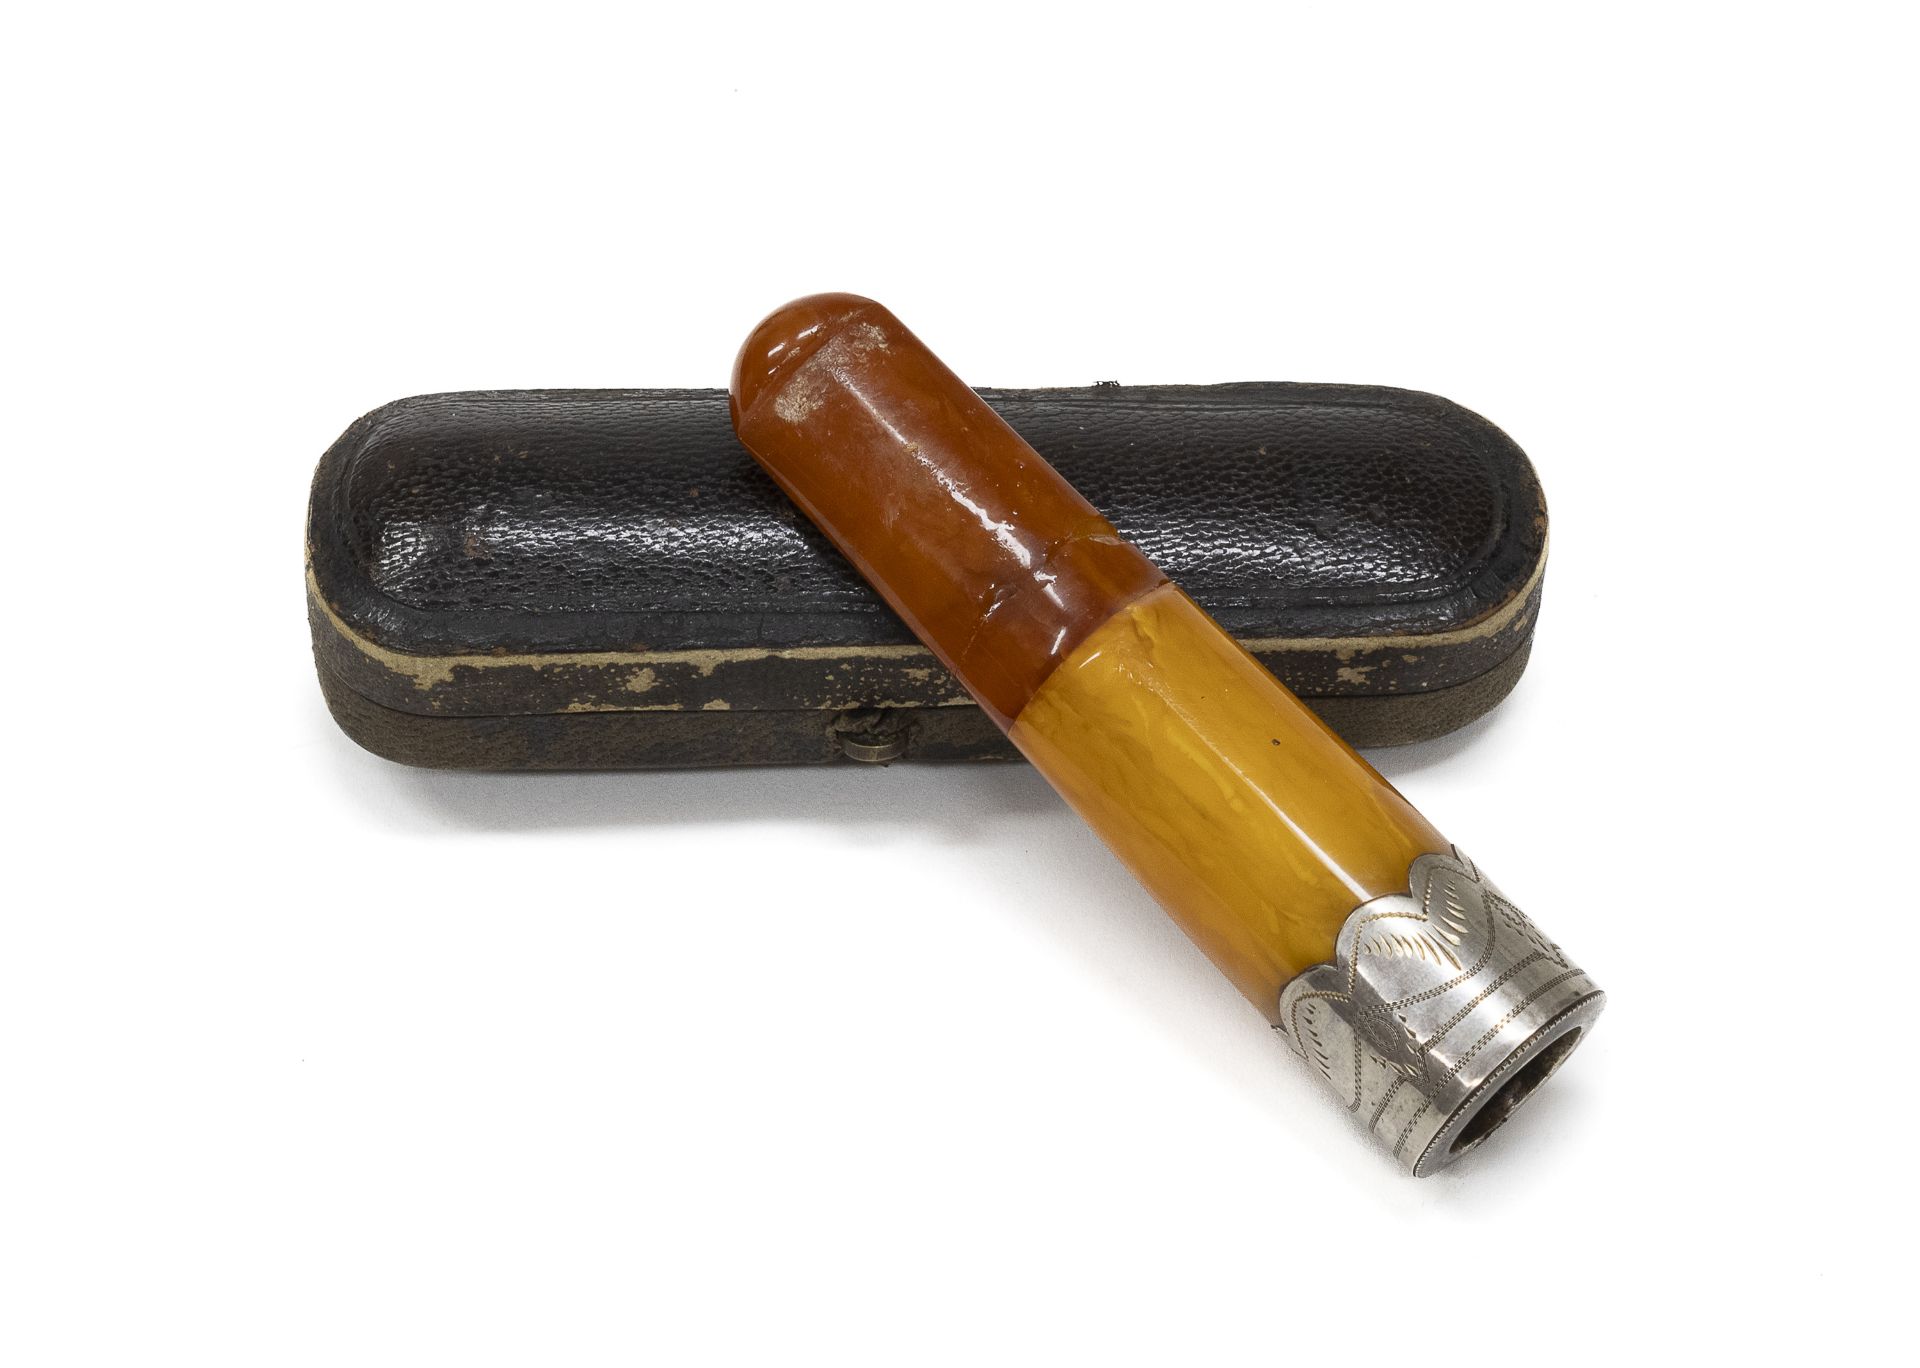 CARNELIAN AND SILVER MOUTHPIECE END OF THE 19TH CENTURY